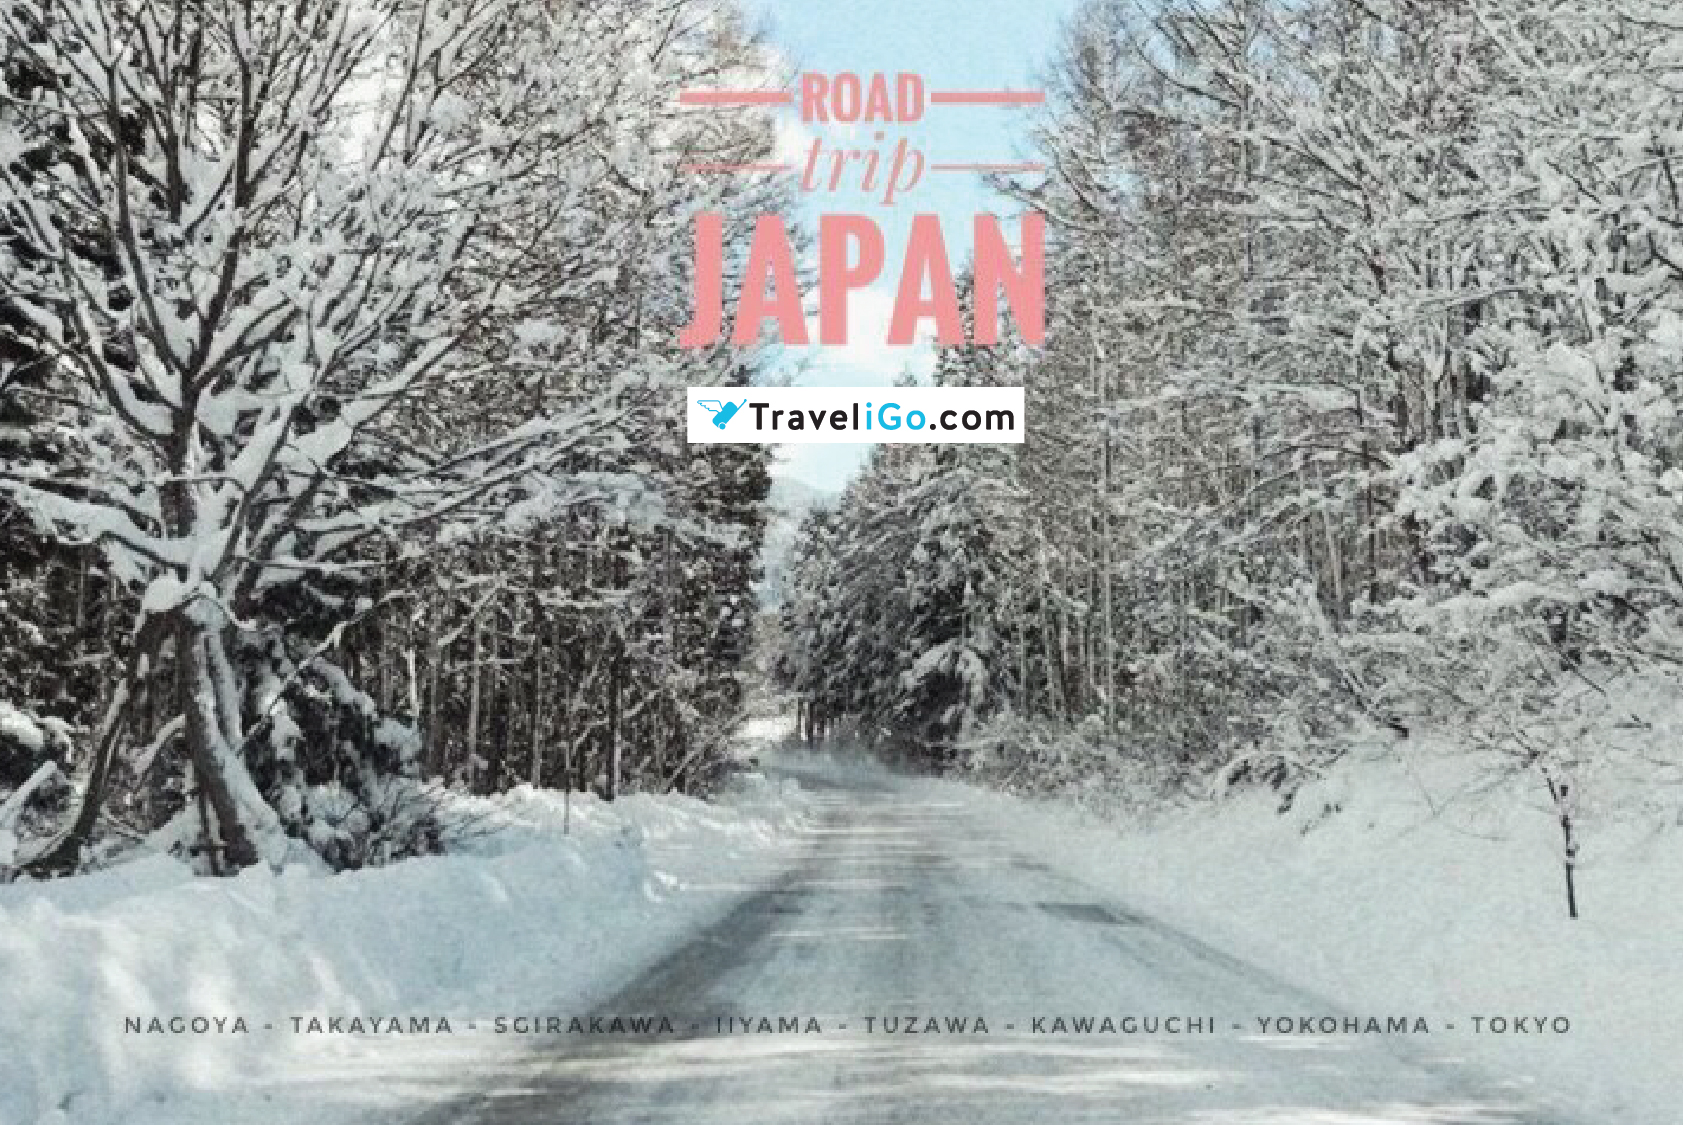 TraveliGo presents a road trip in Japan with PALAPILII